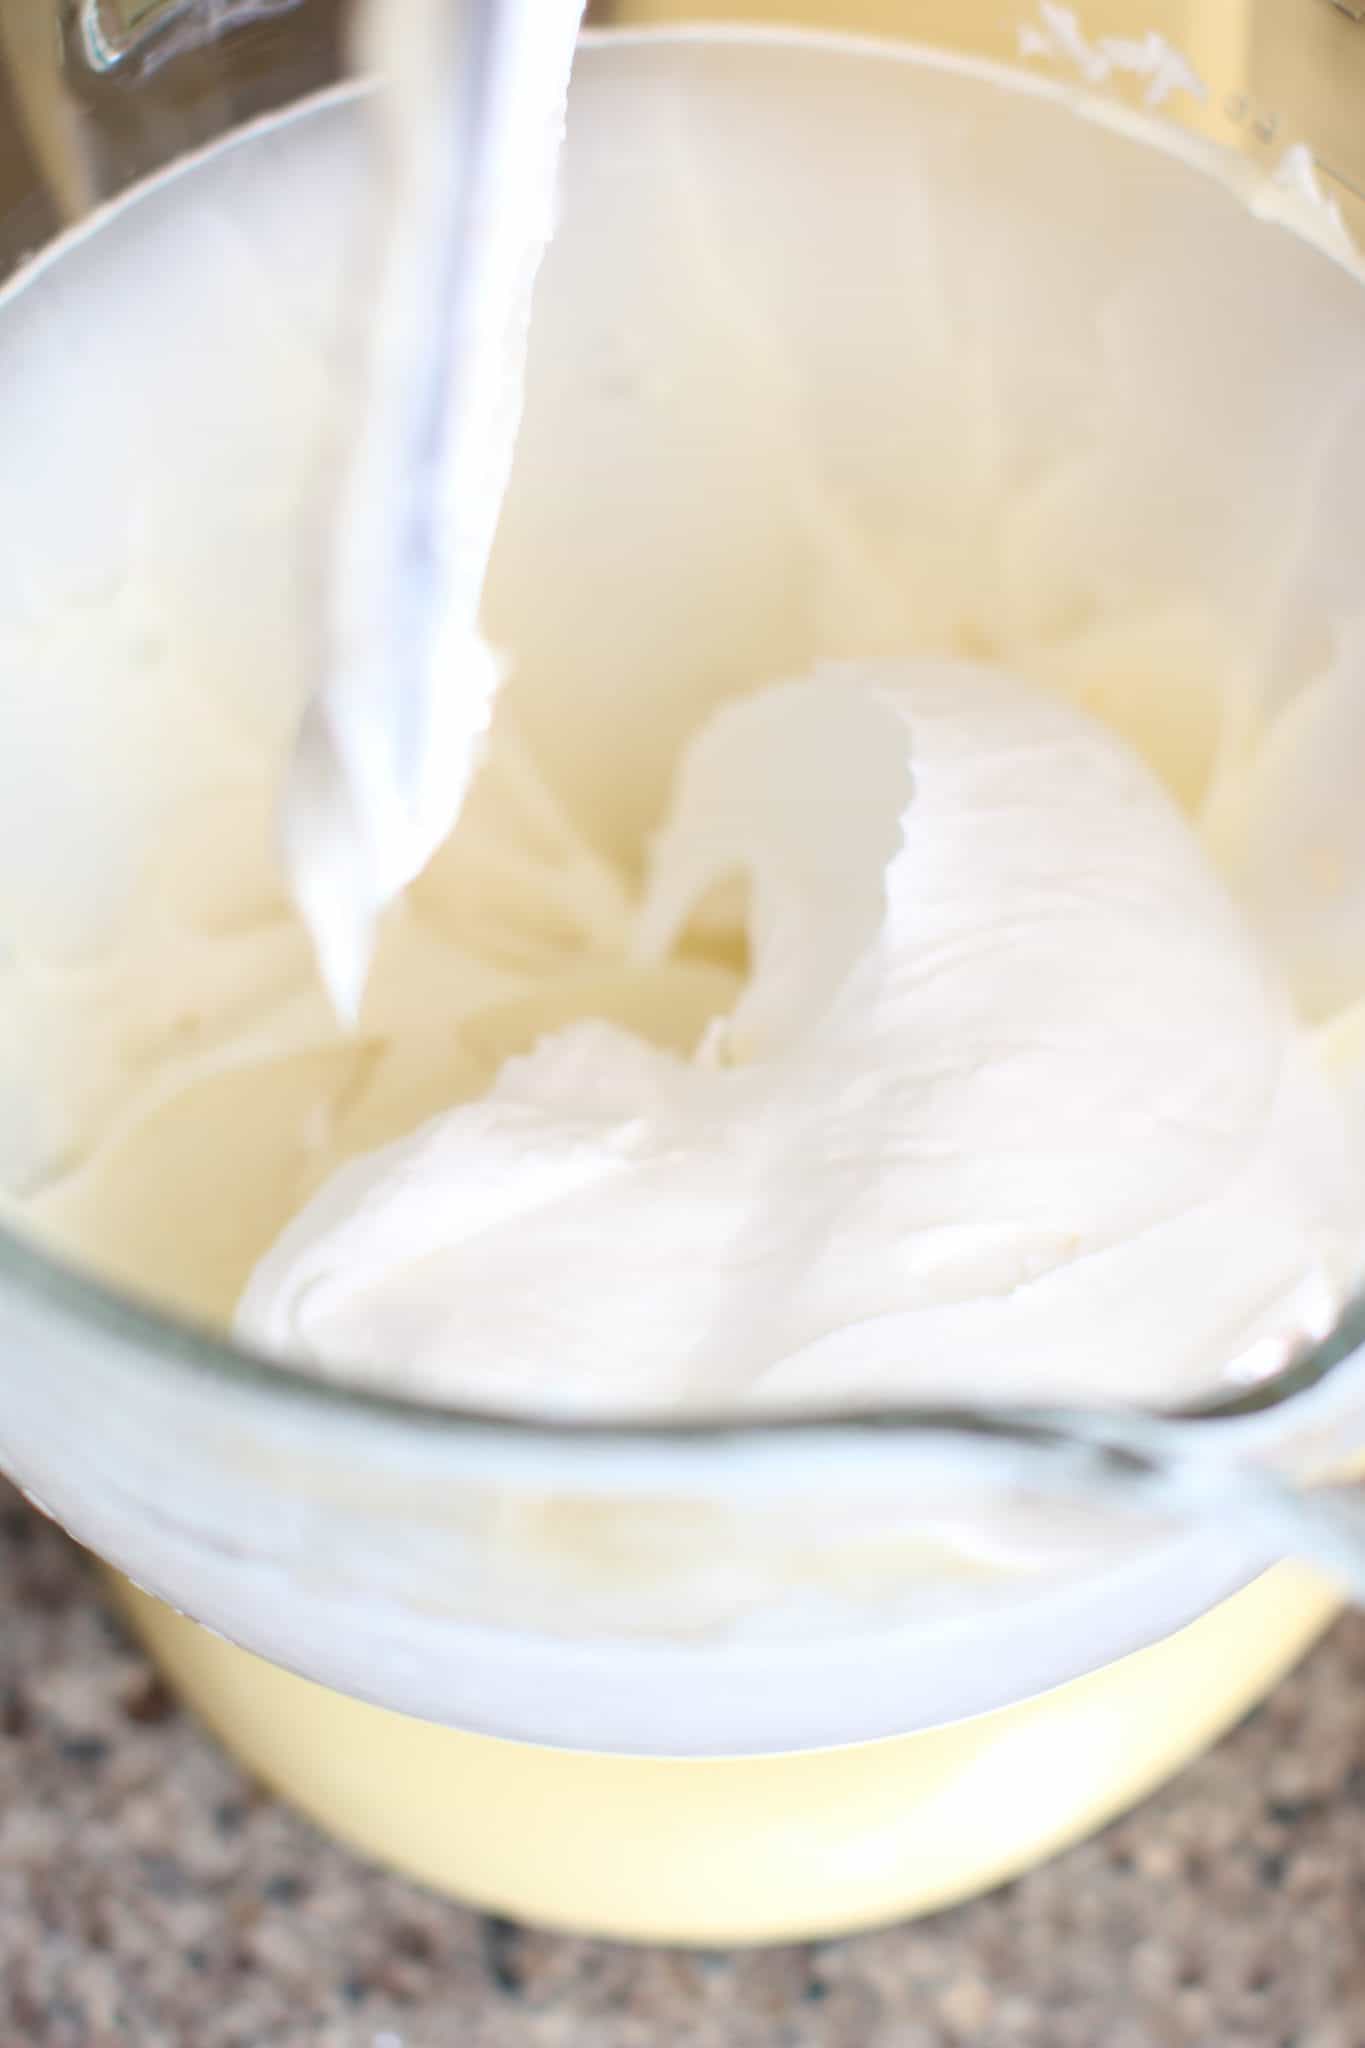 whipped topping added to cream cheese/sugar mixture.